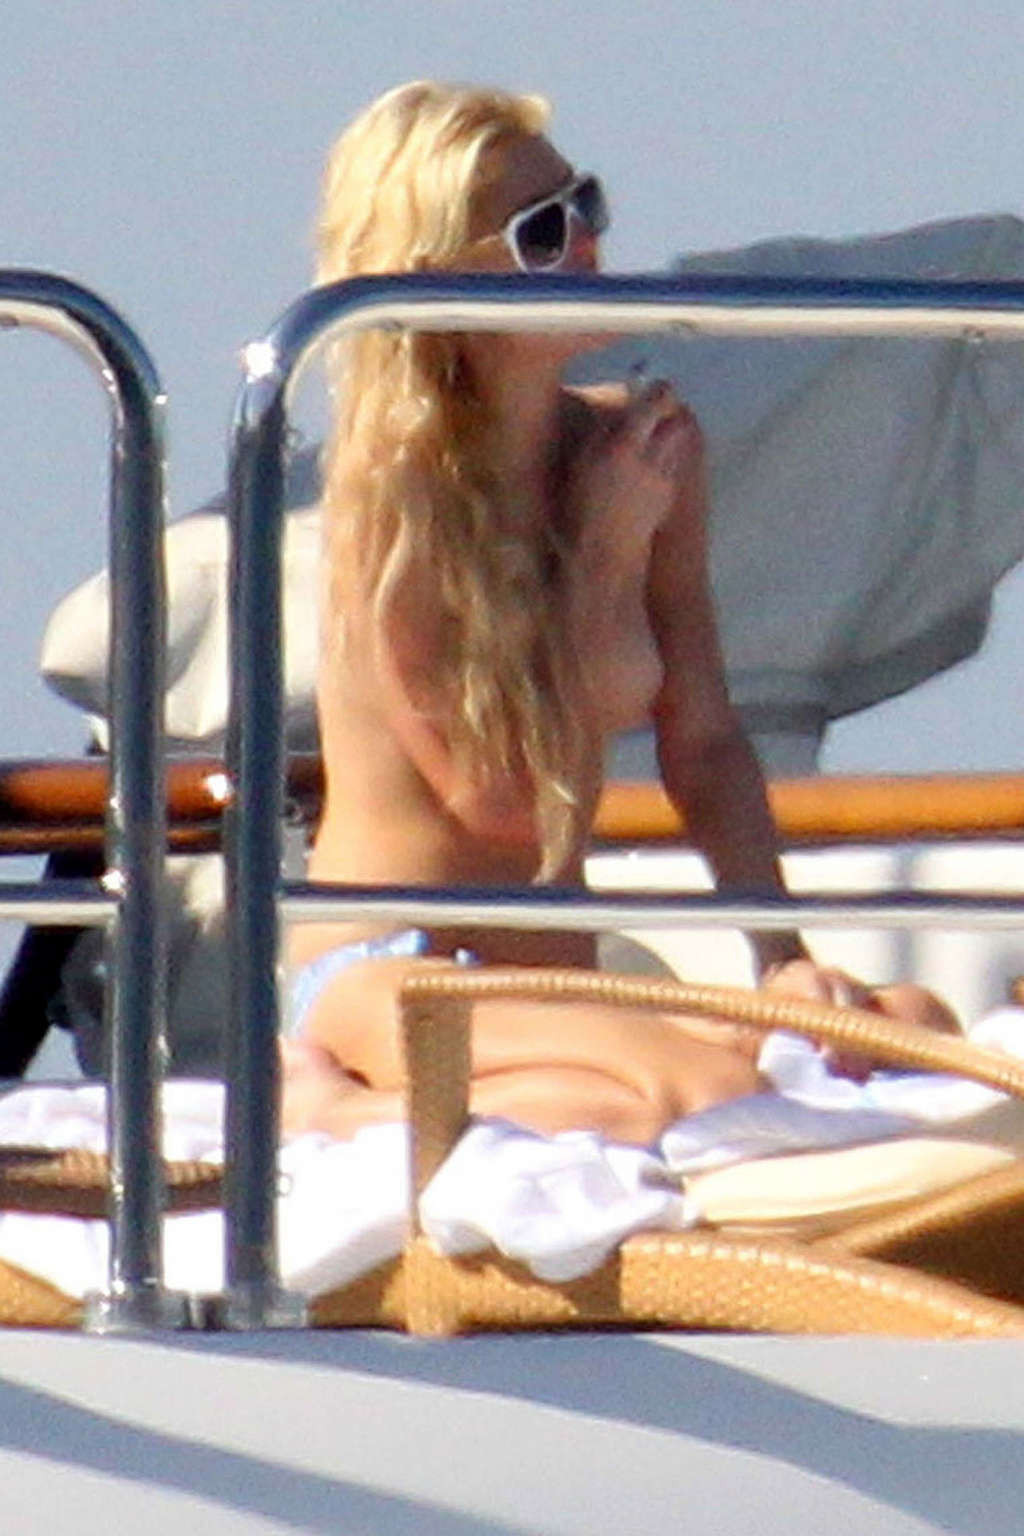 Paris Hilton exposing sexy body and enjoying in topless on yacht #75341121